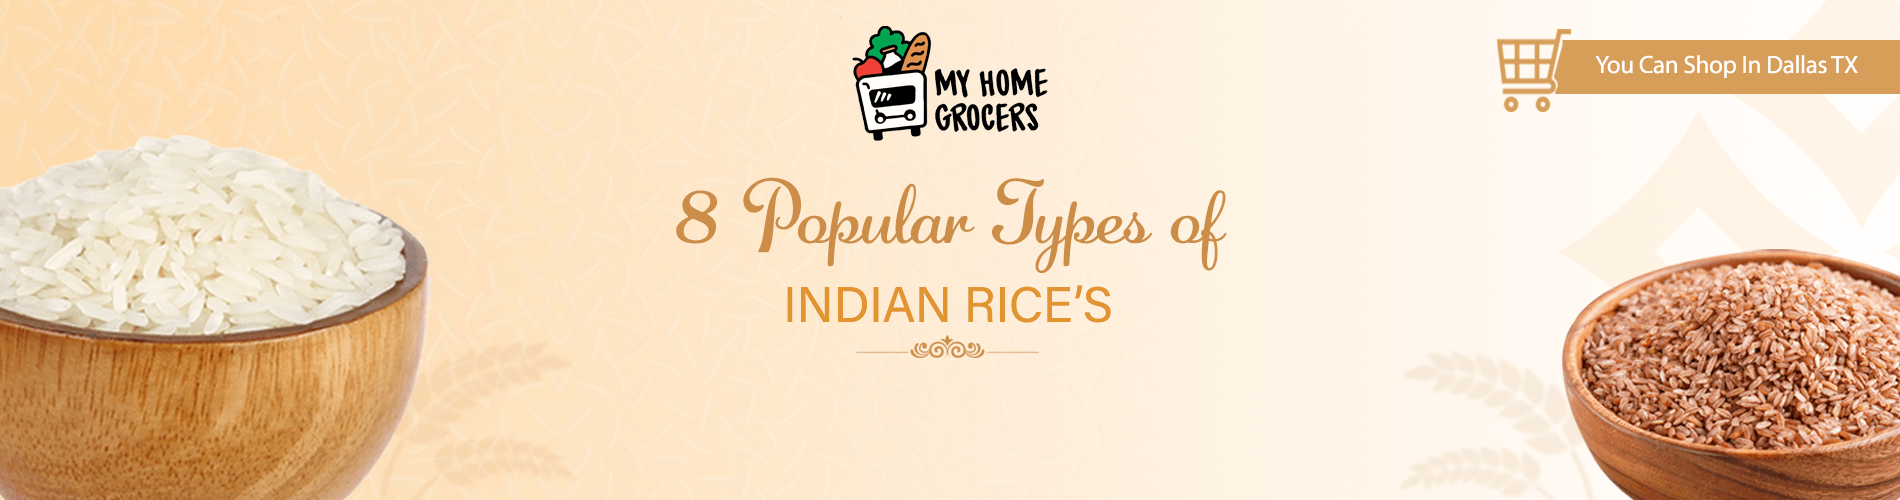 8 Popular Types of Indian Rice’s You Can Shop In Dallas TX